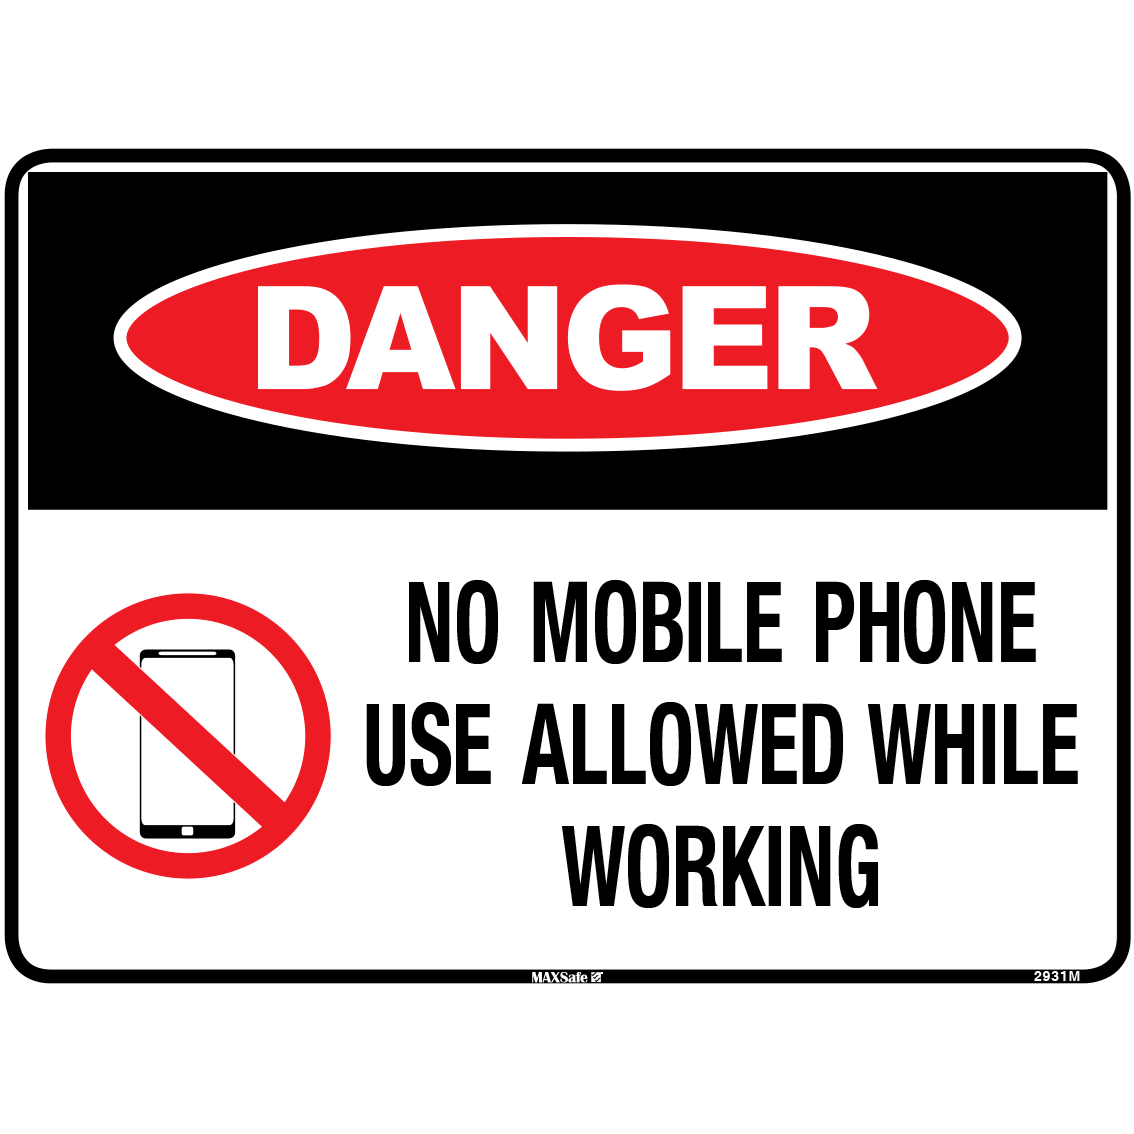 DANGER SIGN NO MOBILE PHONE USE